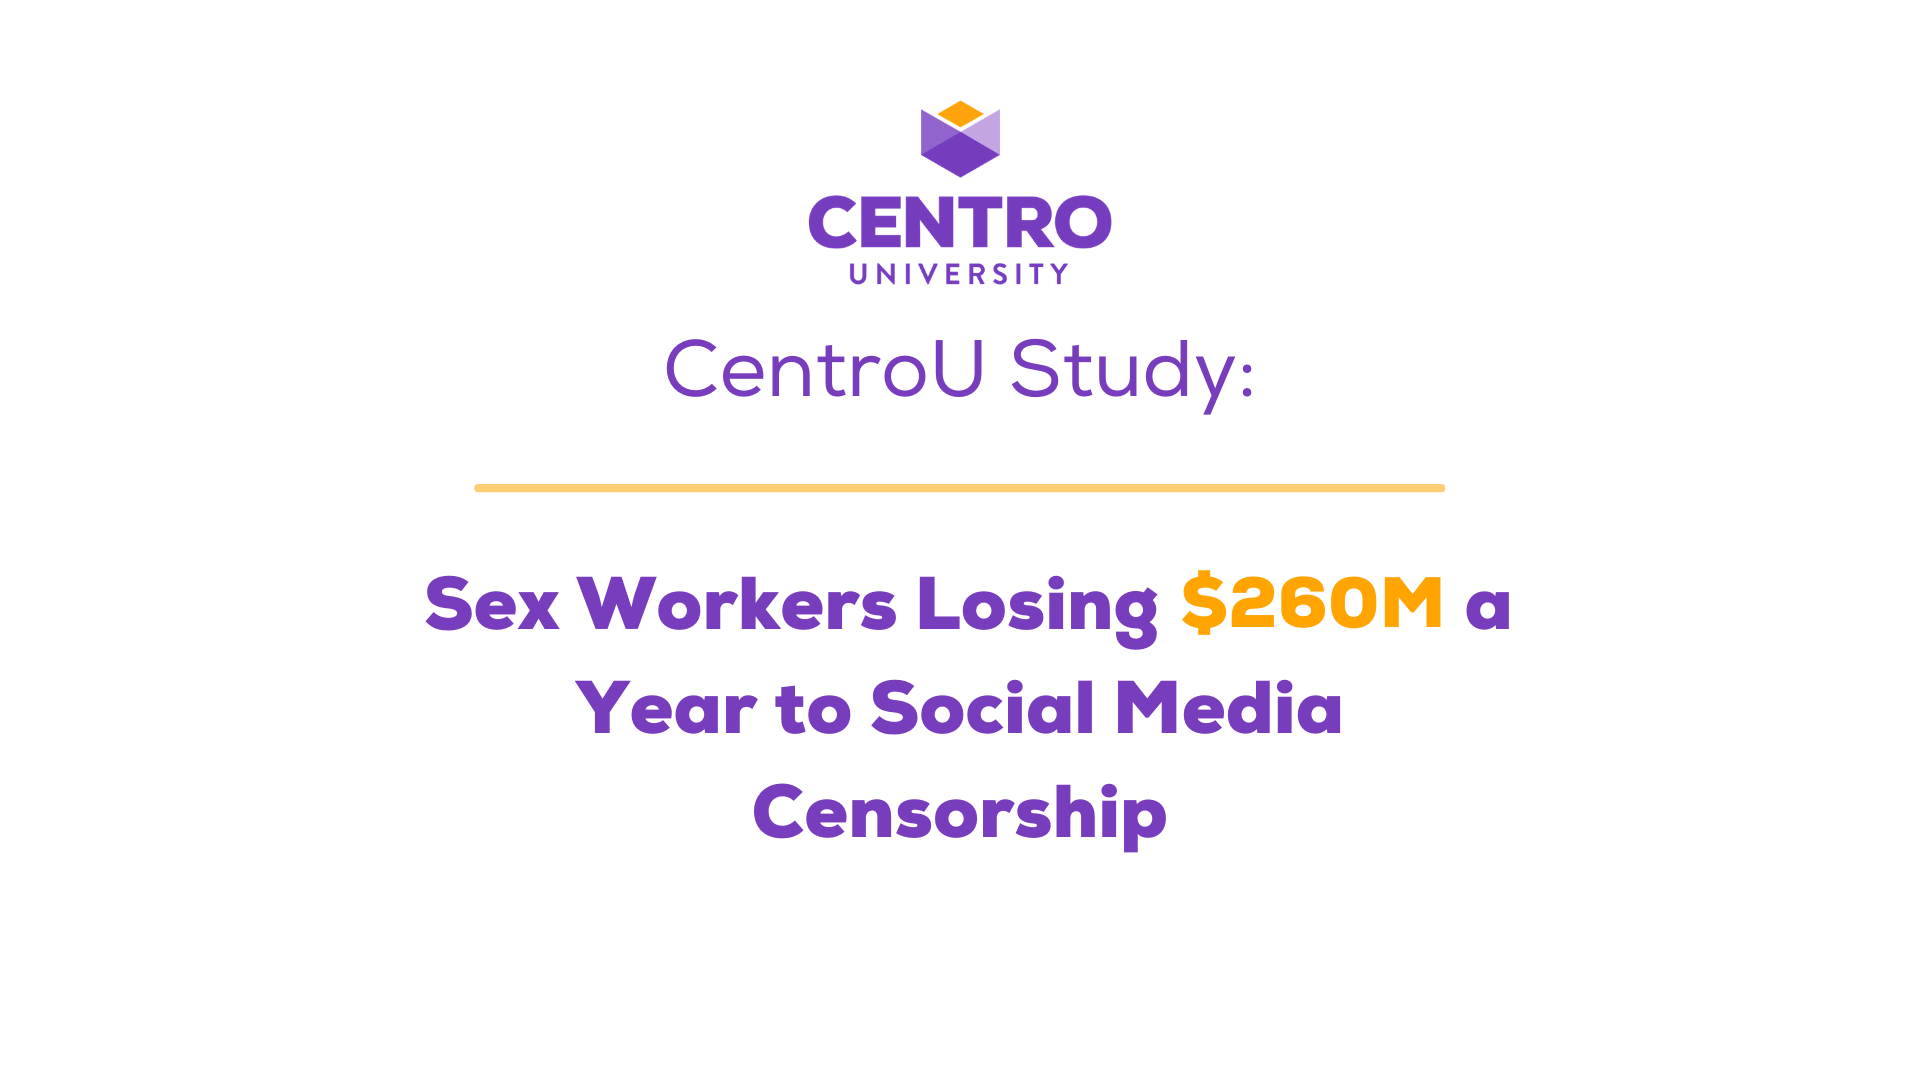 CentroU Study: Sex Workers Losing $260M A Year to Social Media Censorship